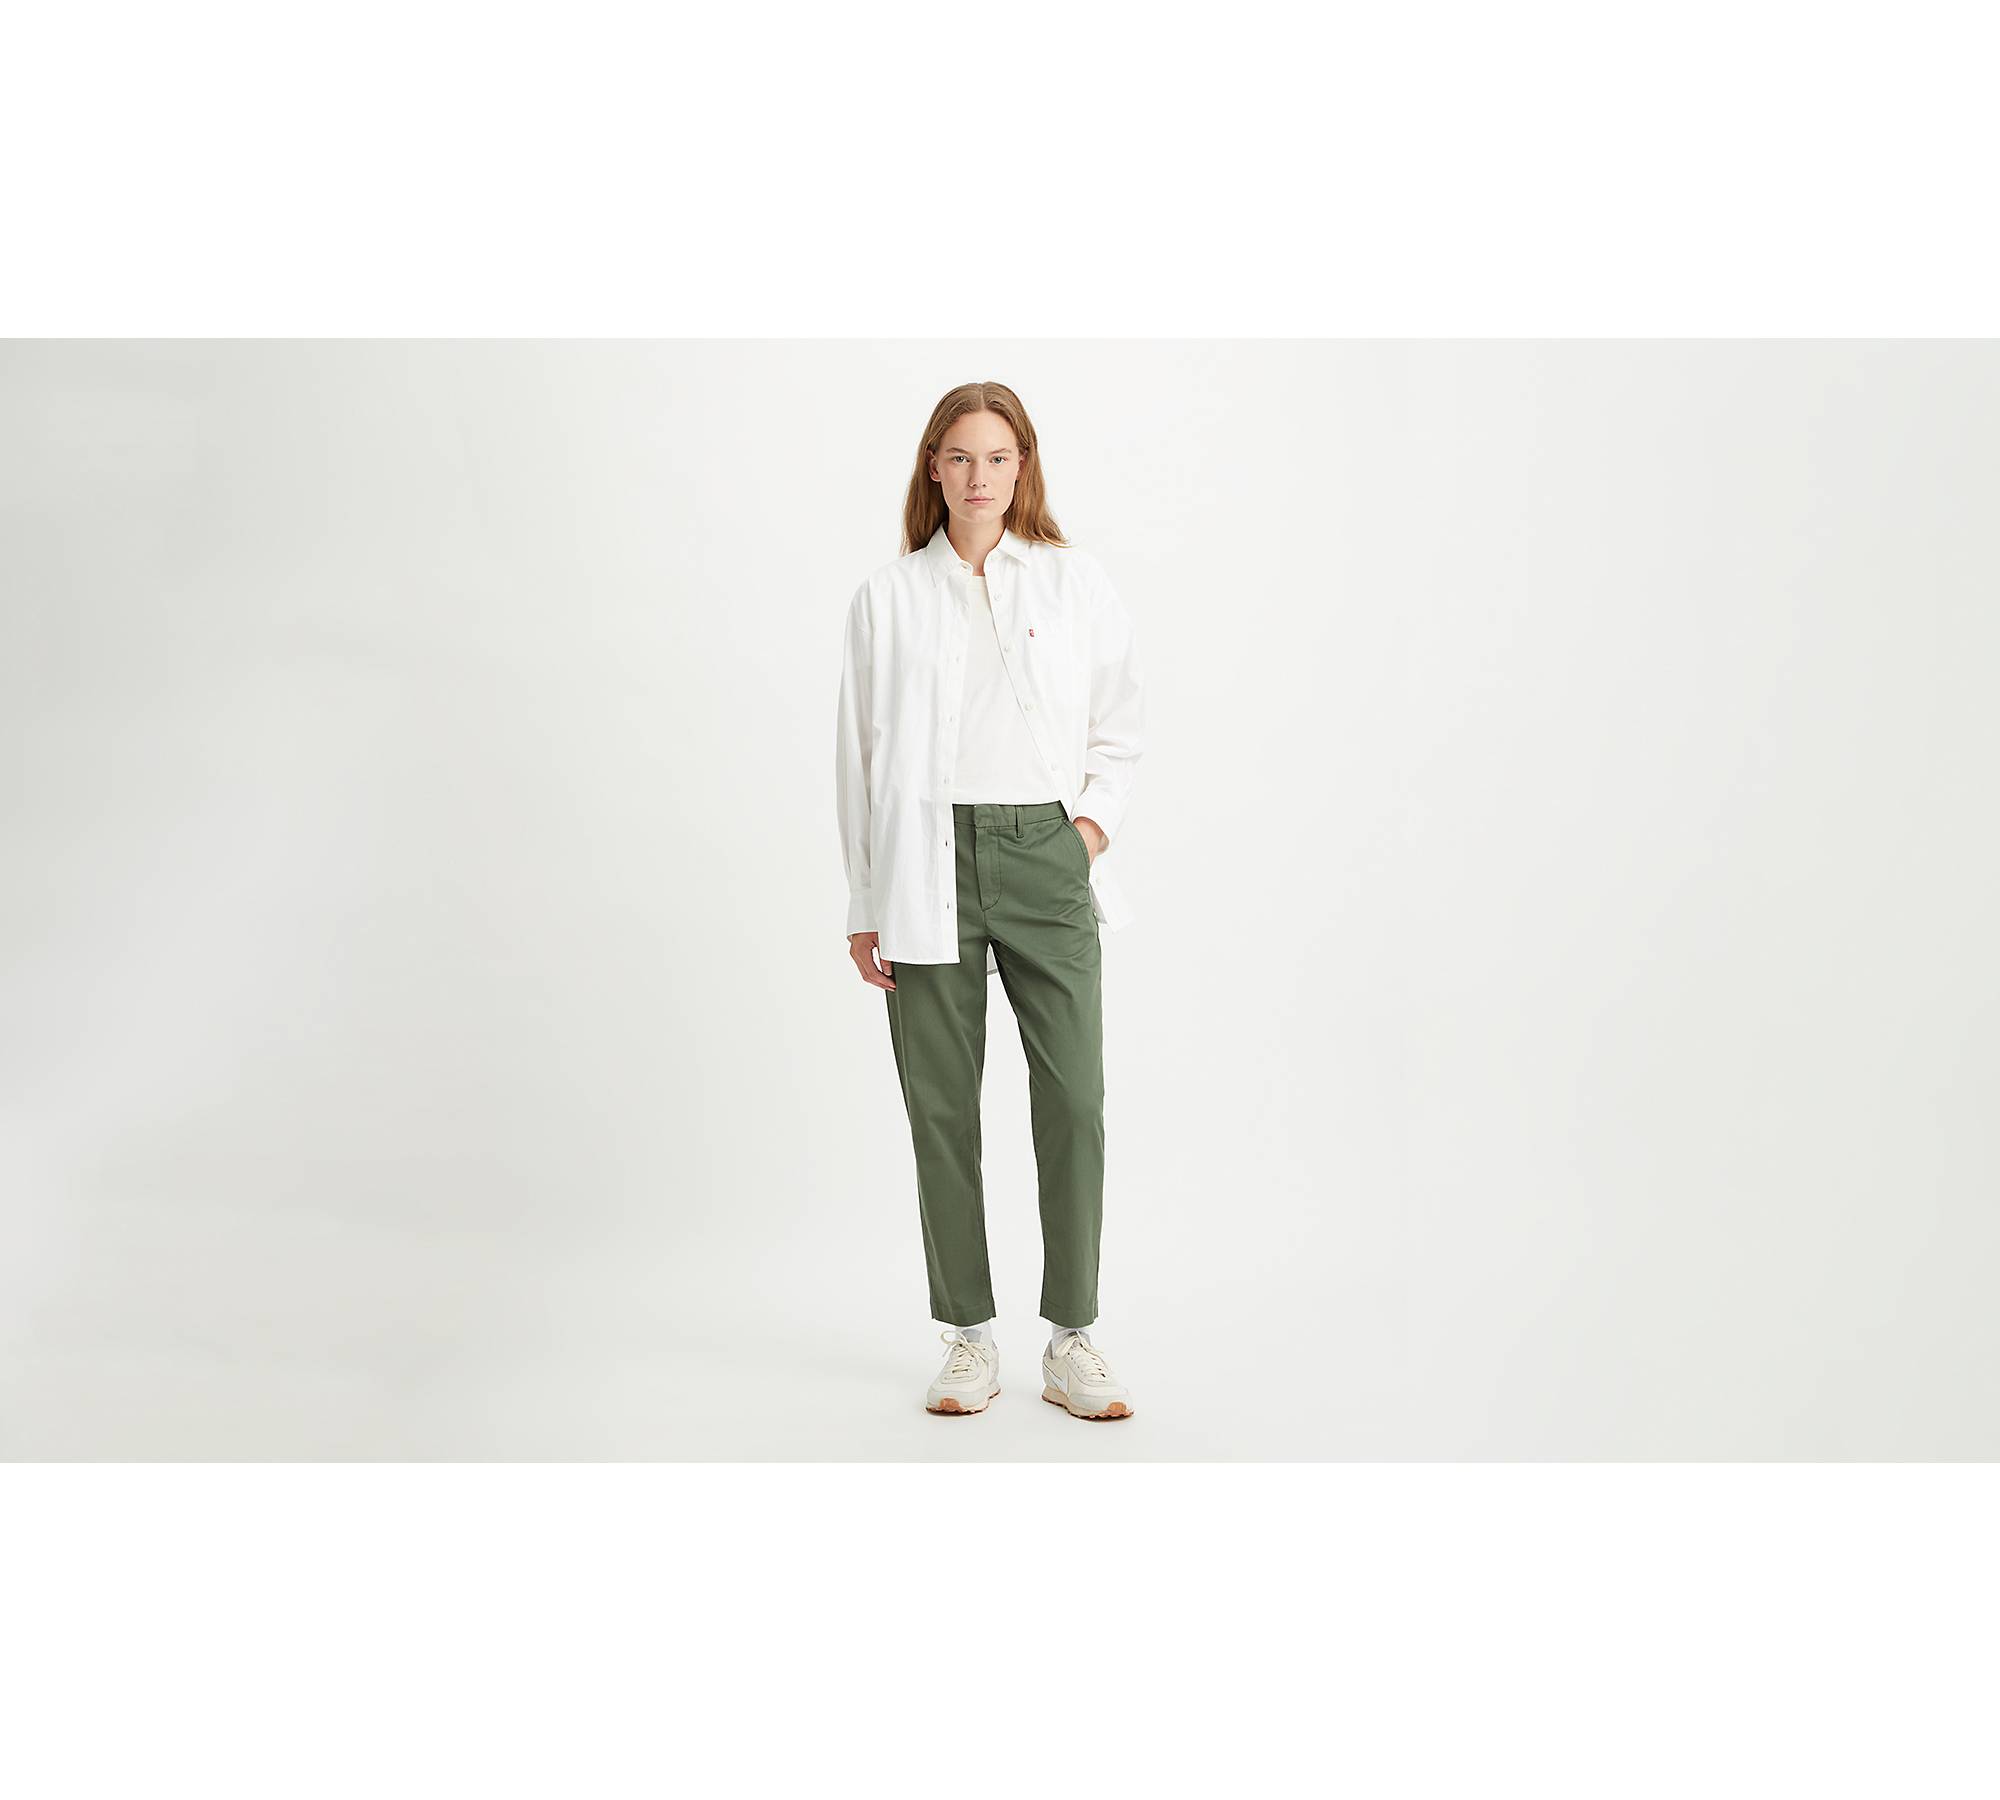 Essentials Women's Straight-Fit Stretch Twill Chino Pant